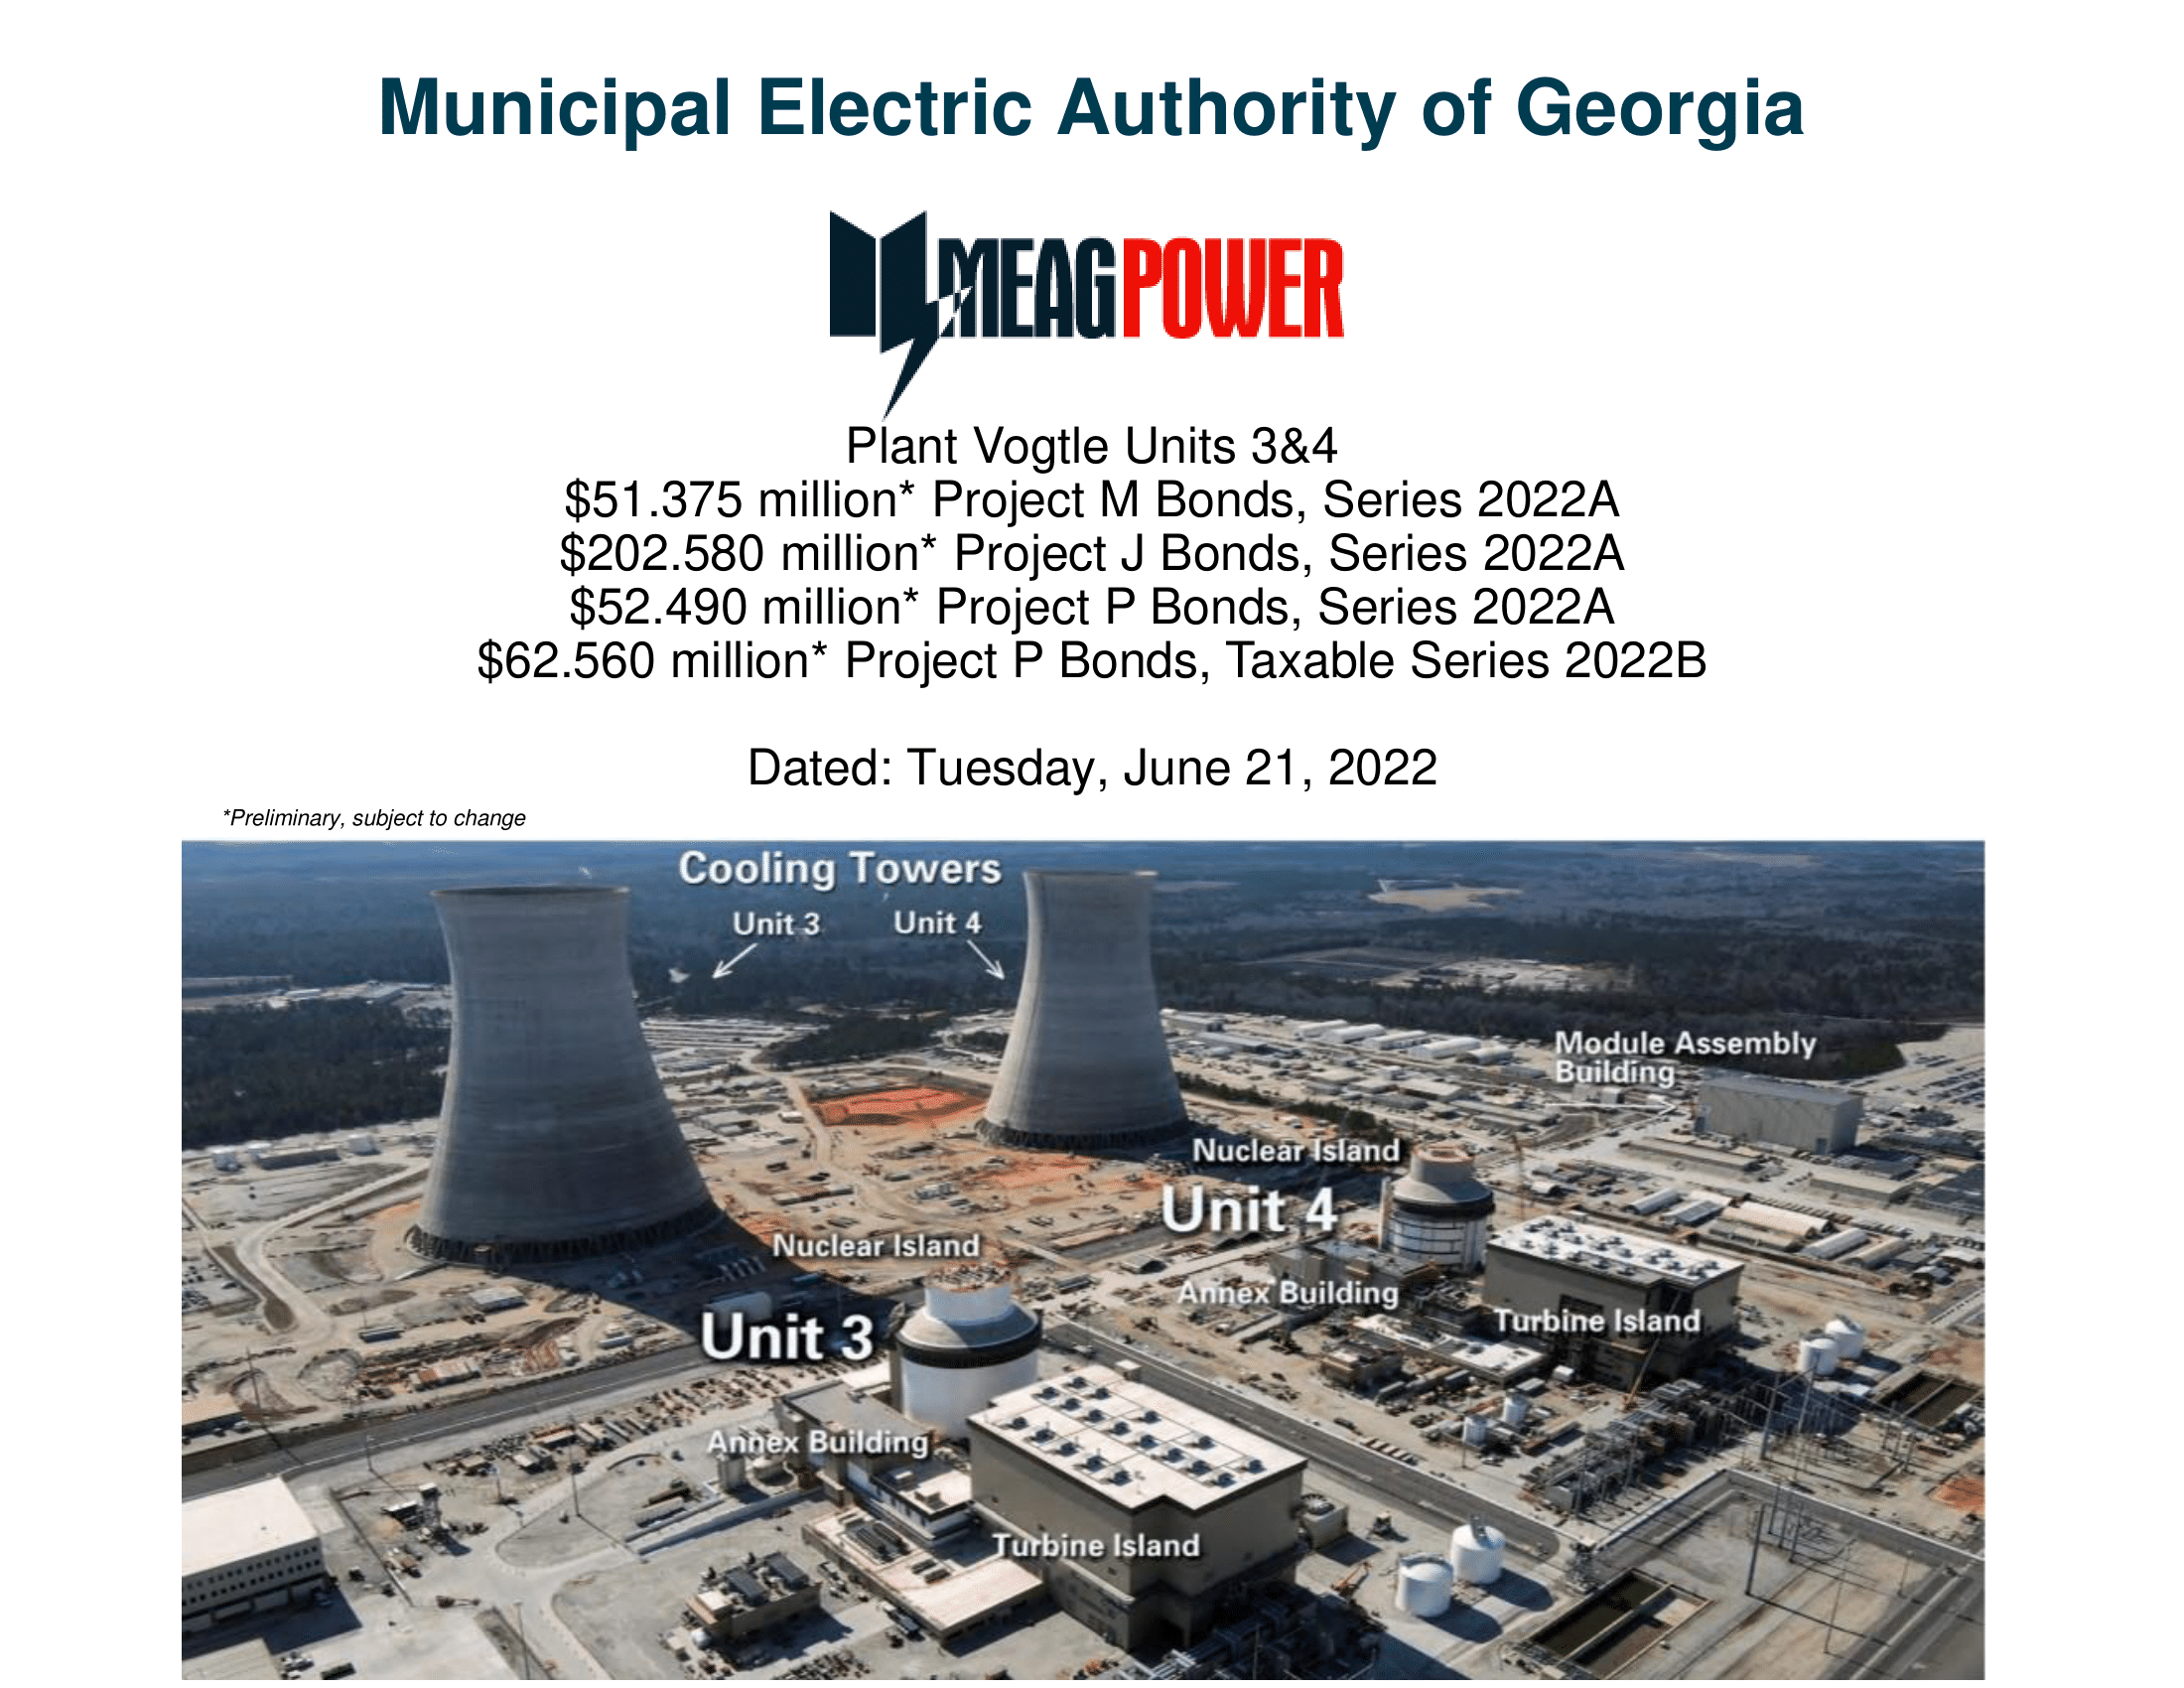 Plant Vogtle Units 3&4 Project M Bonds, Series 2022A, Project J Bonds, Series 2022A, and Project P Bonds, Series 2022A and Taxable Series 2022B Investor Presentation